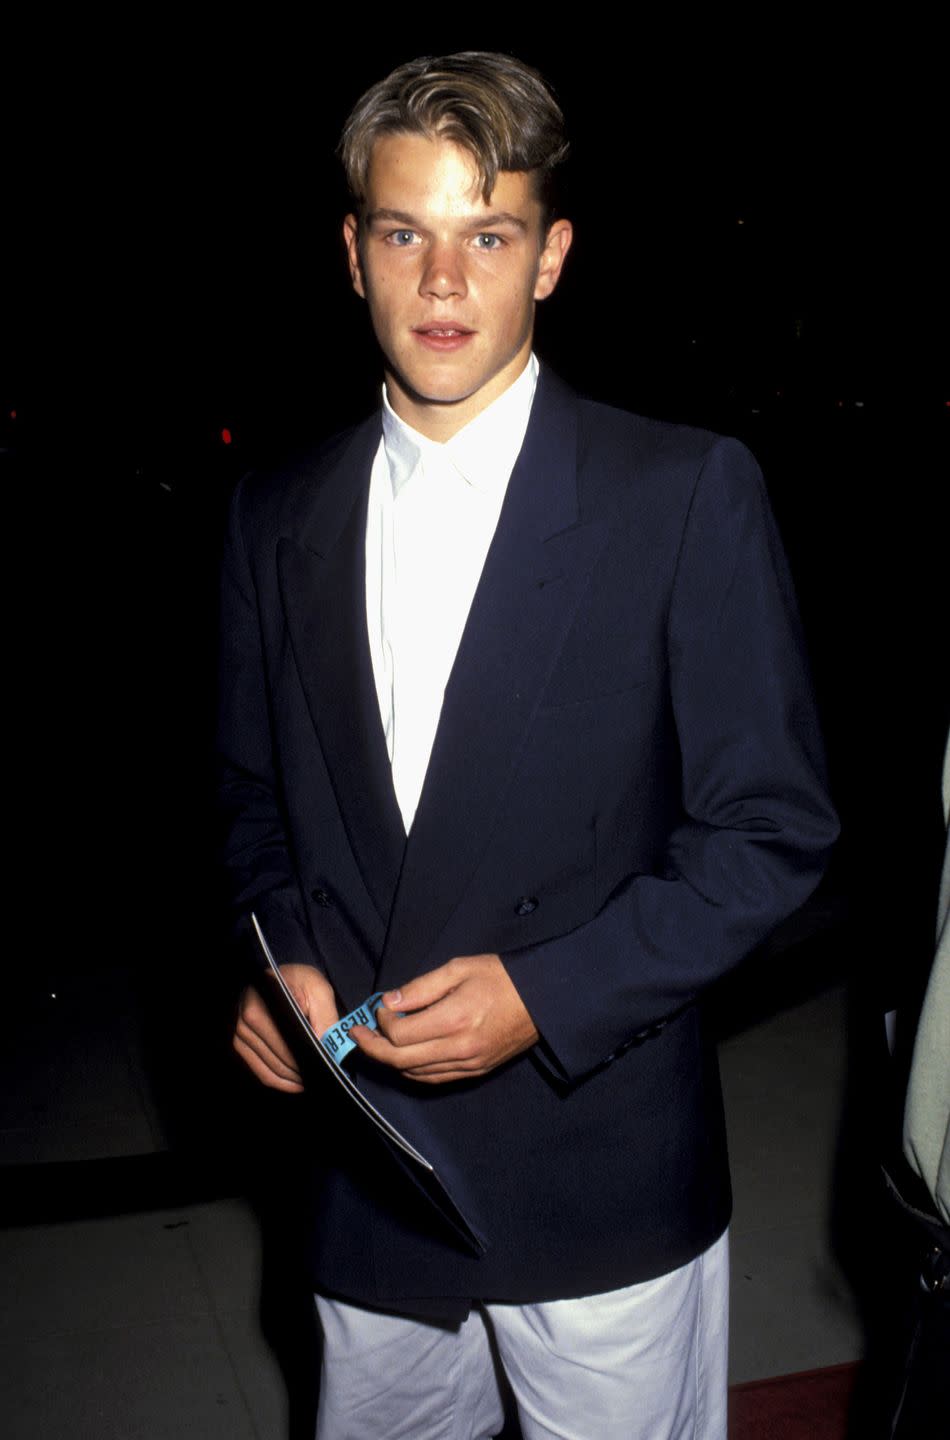 matt damon looks at the camera with a neutral expression on his face, he holds a booklet and wears a navy blue jacket and white collared shirt